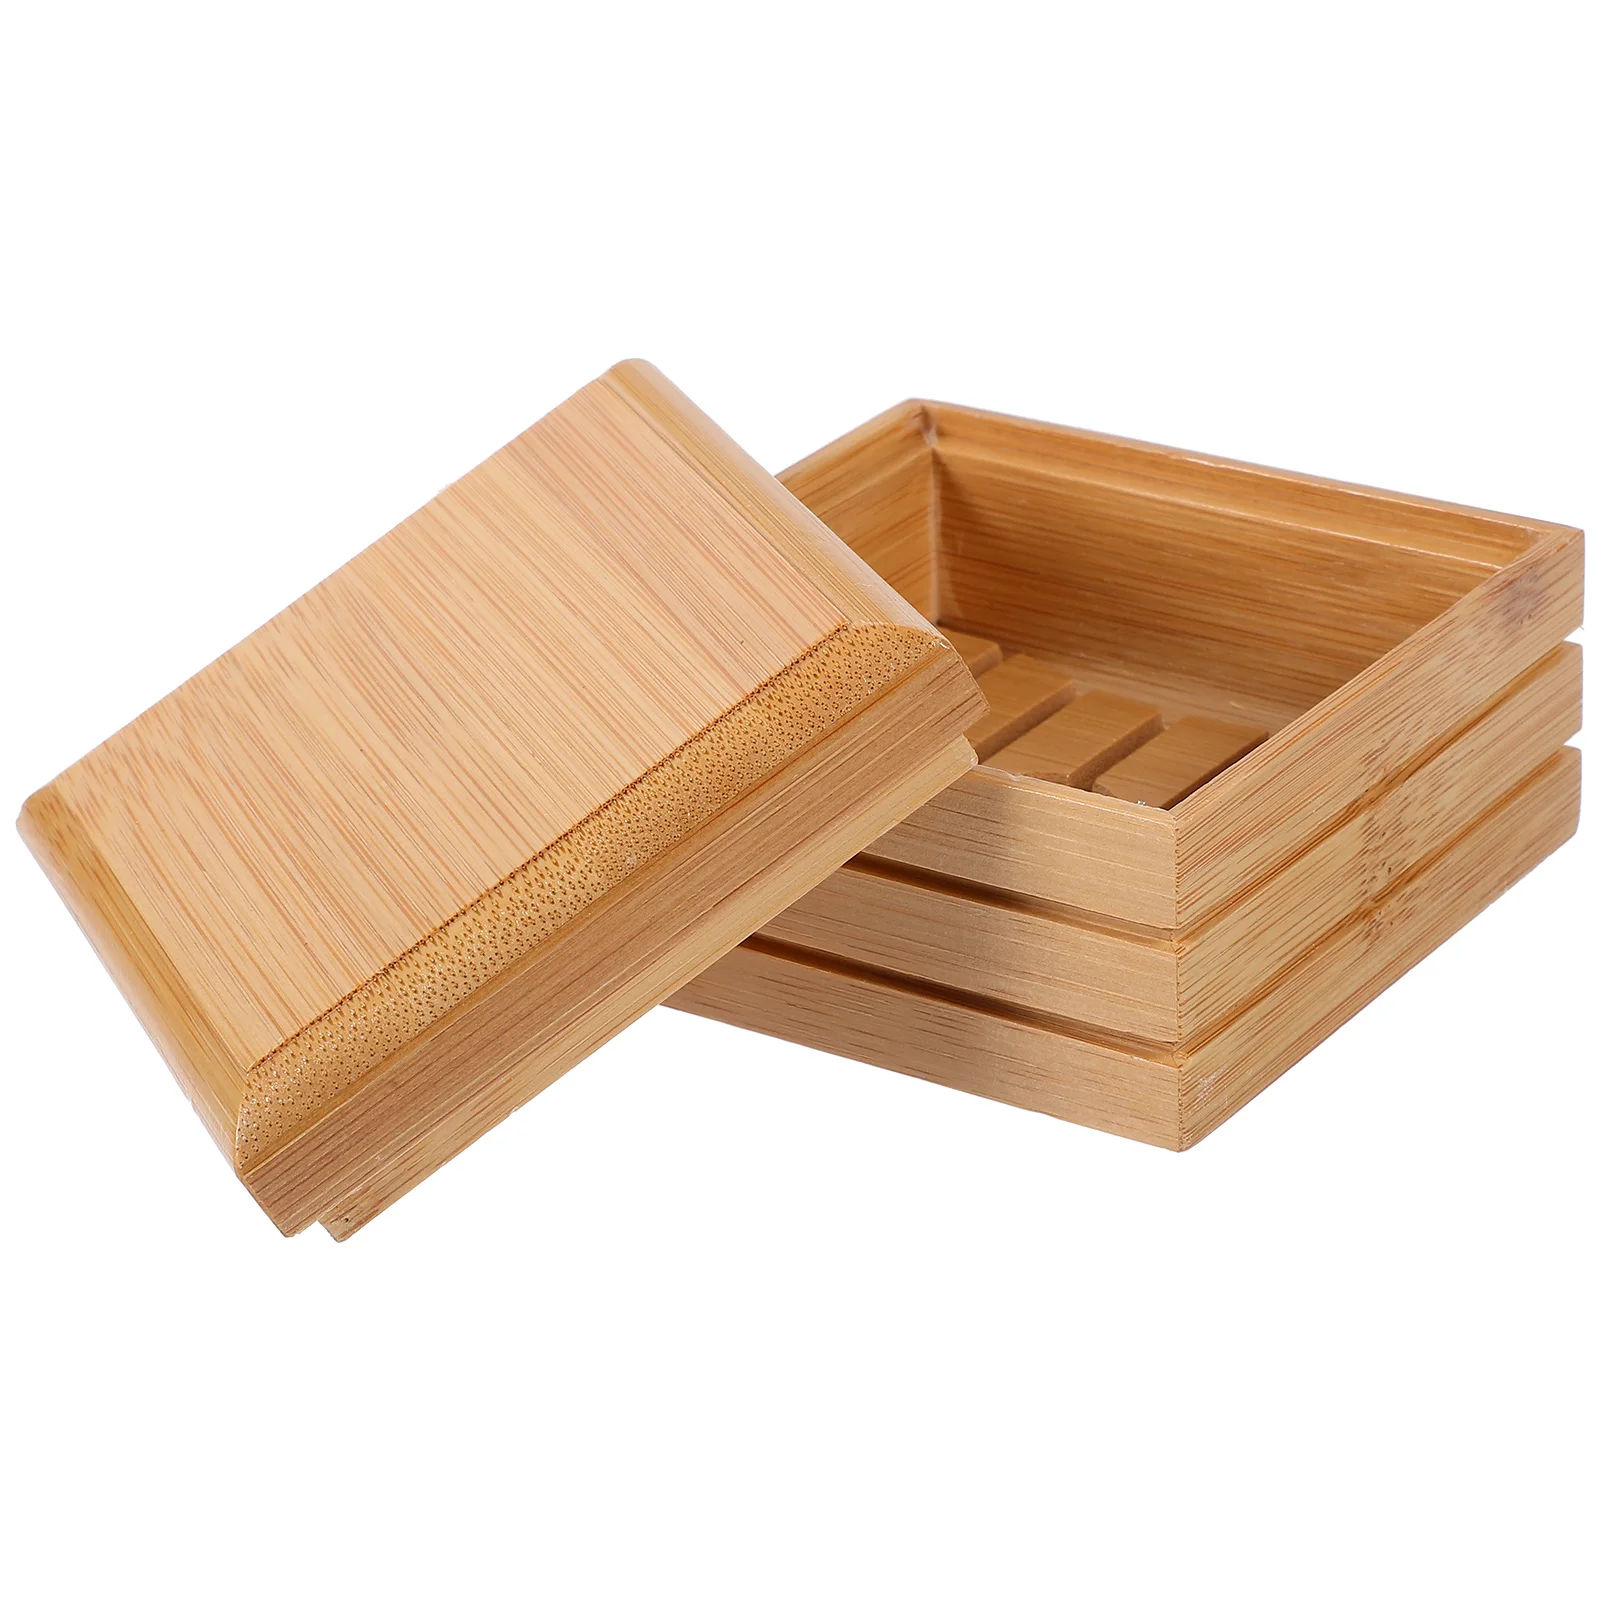 

Wooden Soap Dish Dishes Bar Household Rack Holder Storage Tray Case Natural Bathtub Trays